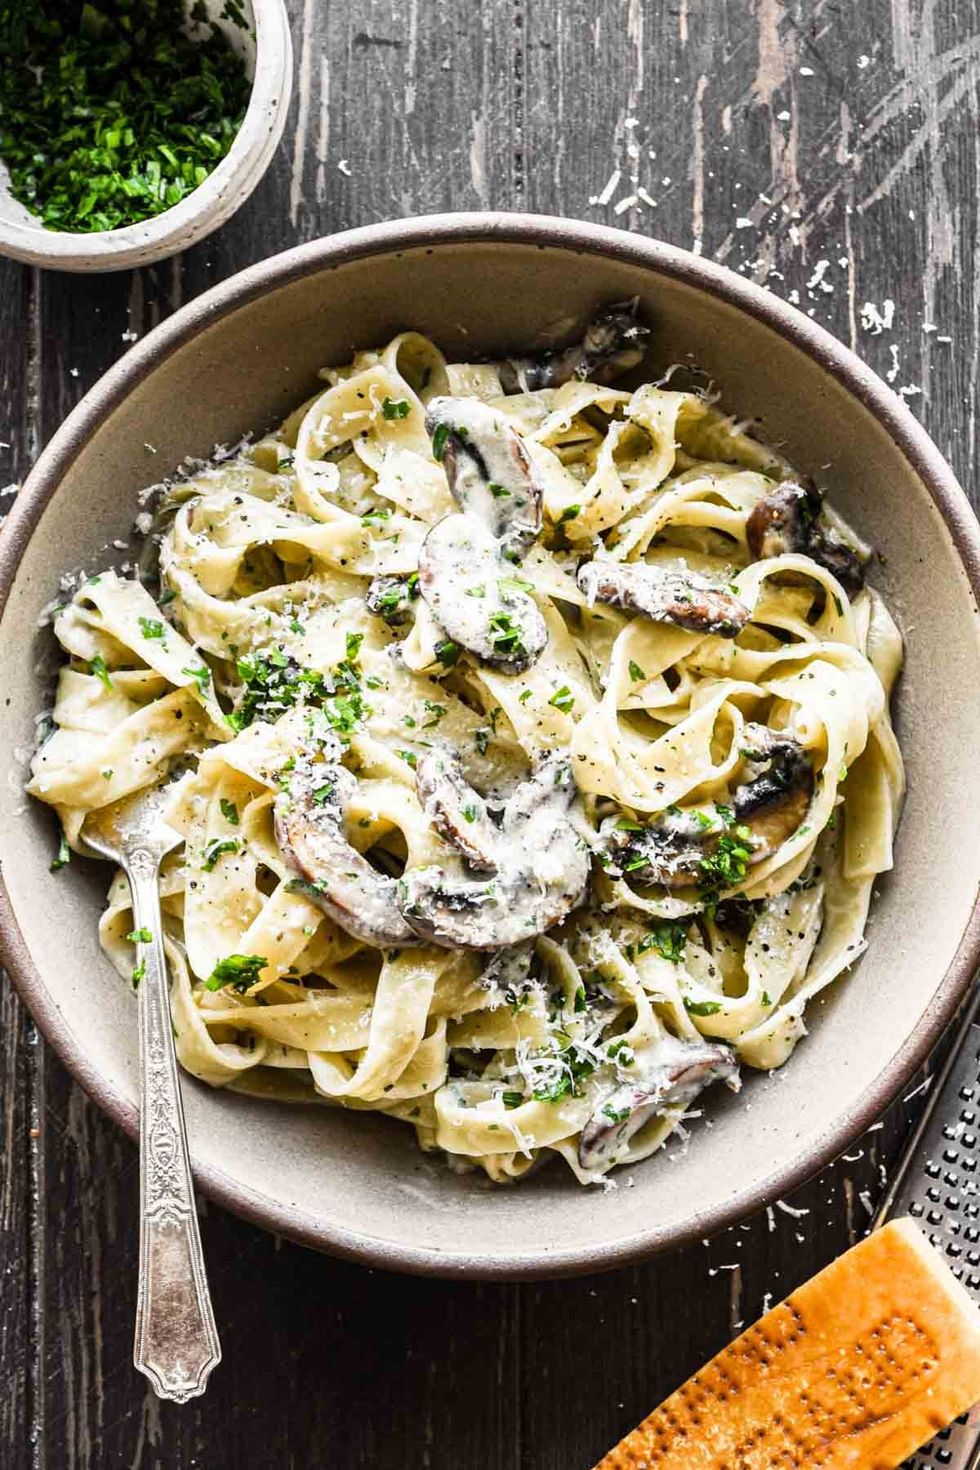 36 Pasta Recipes To Make For Easy Weeknight Dinners - Brit + Co